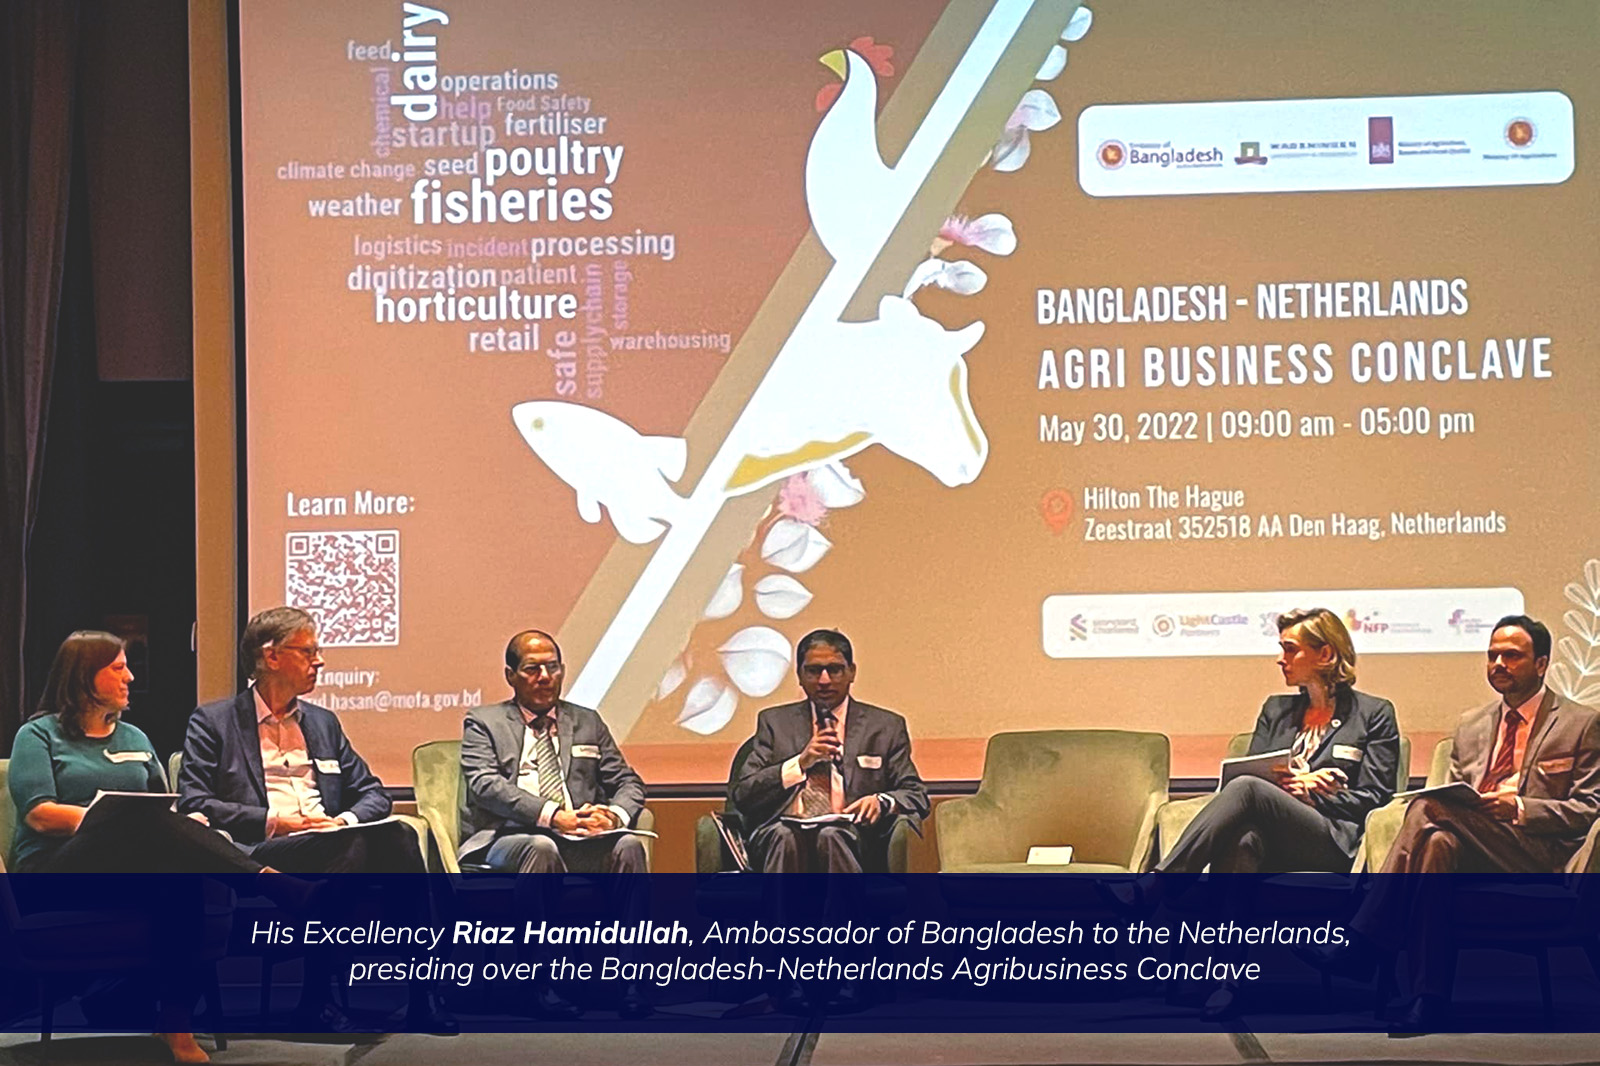 Riaz Hamidullah presiding over the Agribusiness Conclave